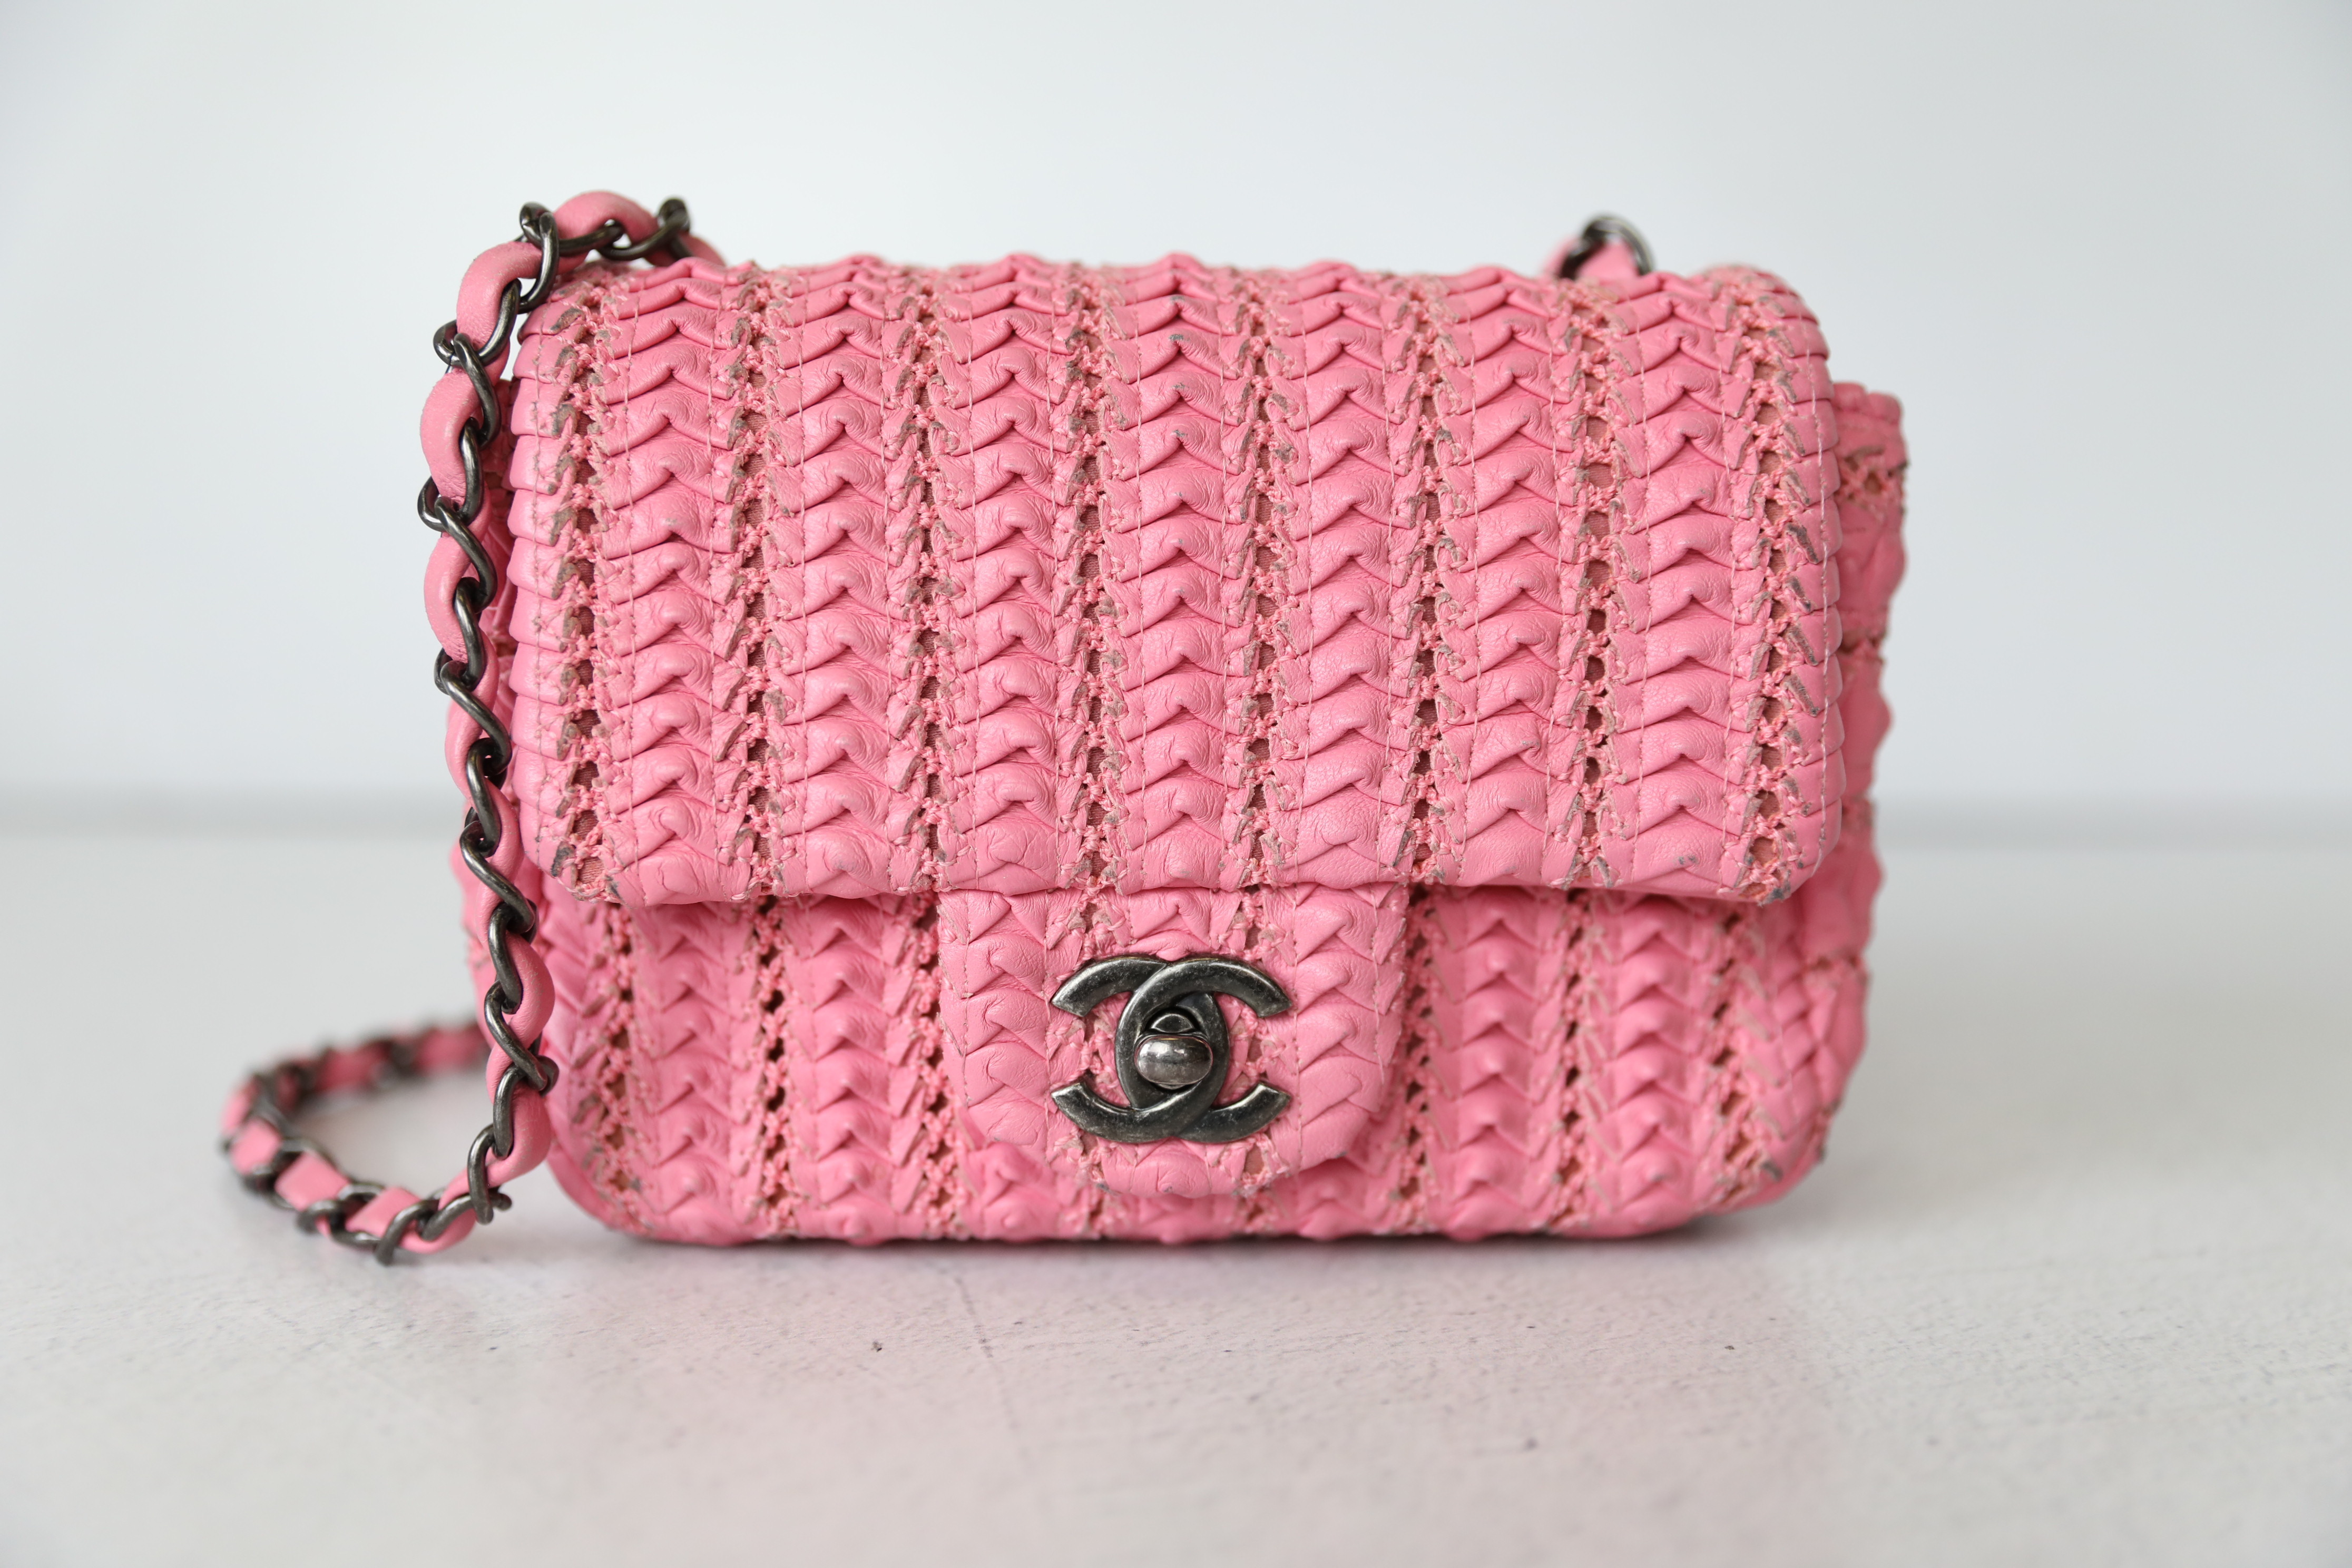 Chanel Mini Square Flap, Pink Woven Leather with Ruthenium Hardware,  Preowned in Dustbag WA001 - Julia Rose Boston